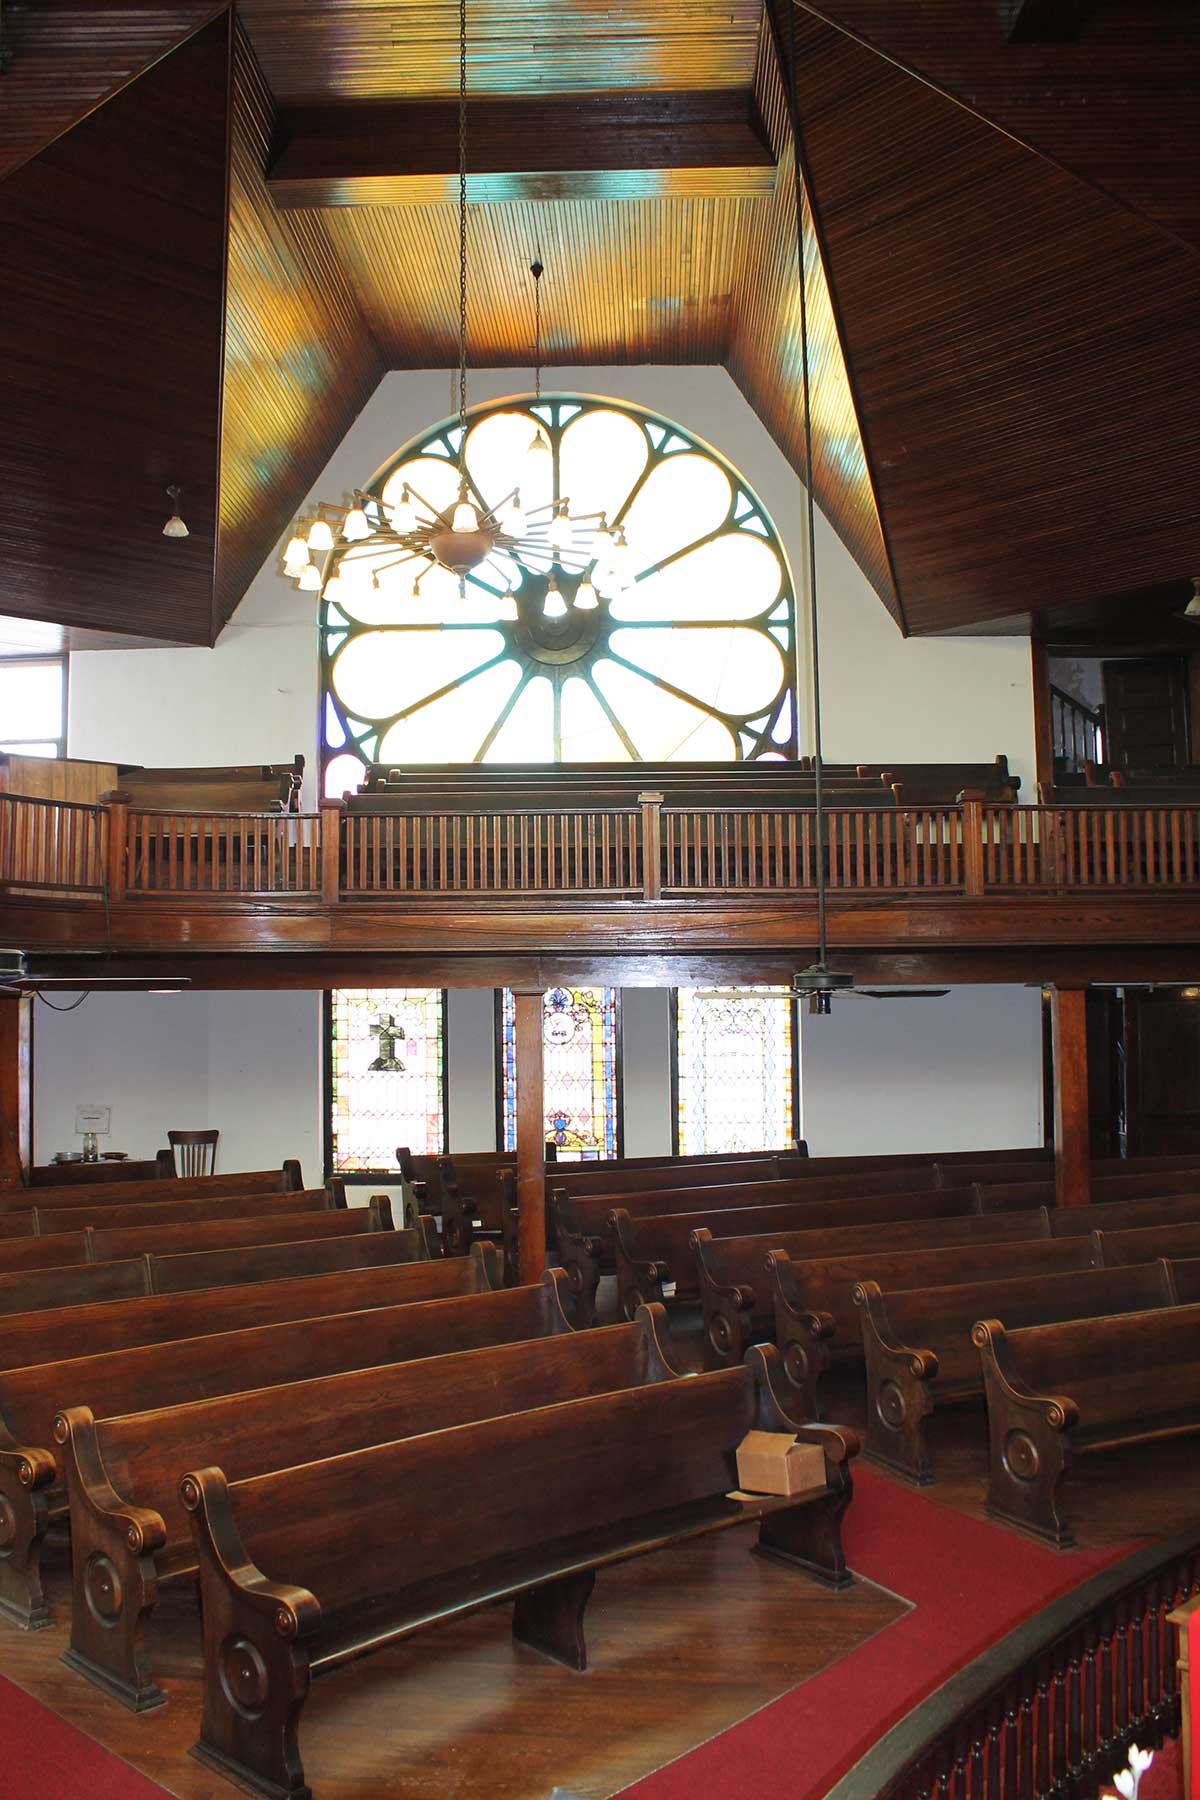 church interior shows wooden pews and stained glass window at back